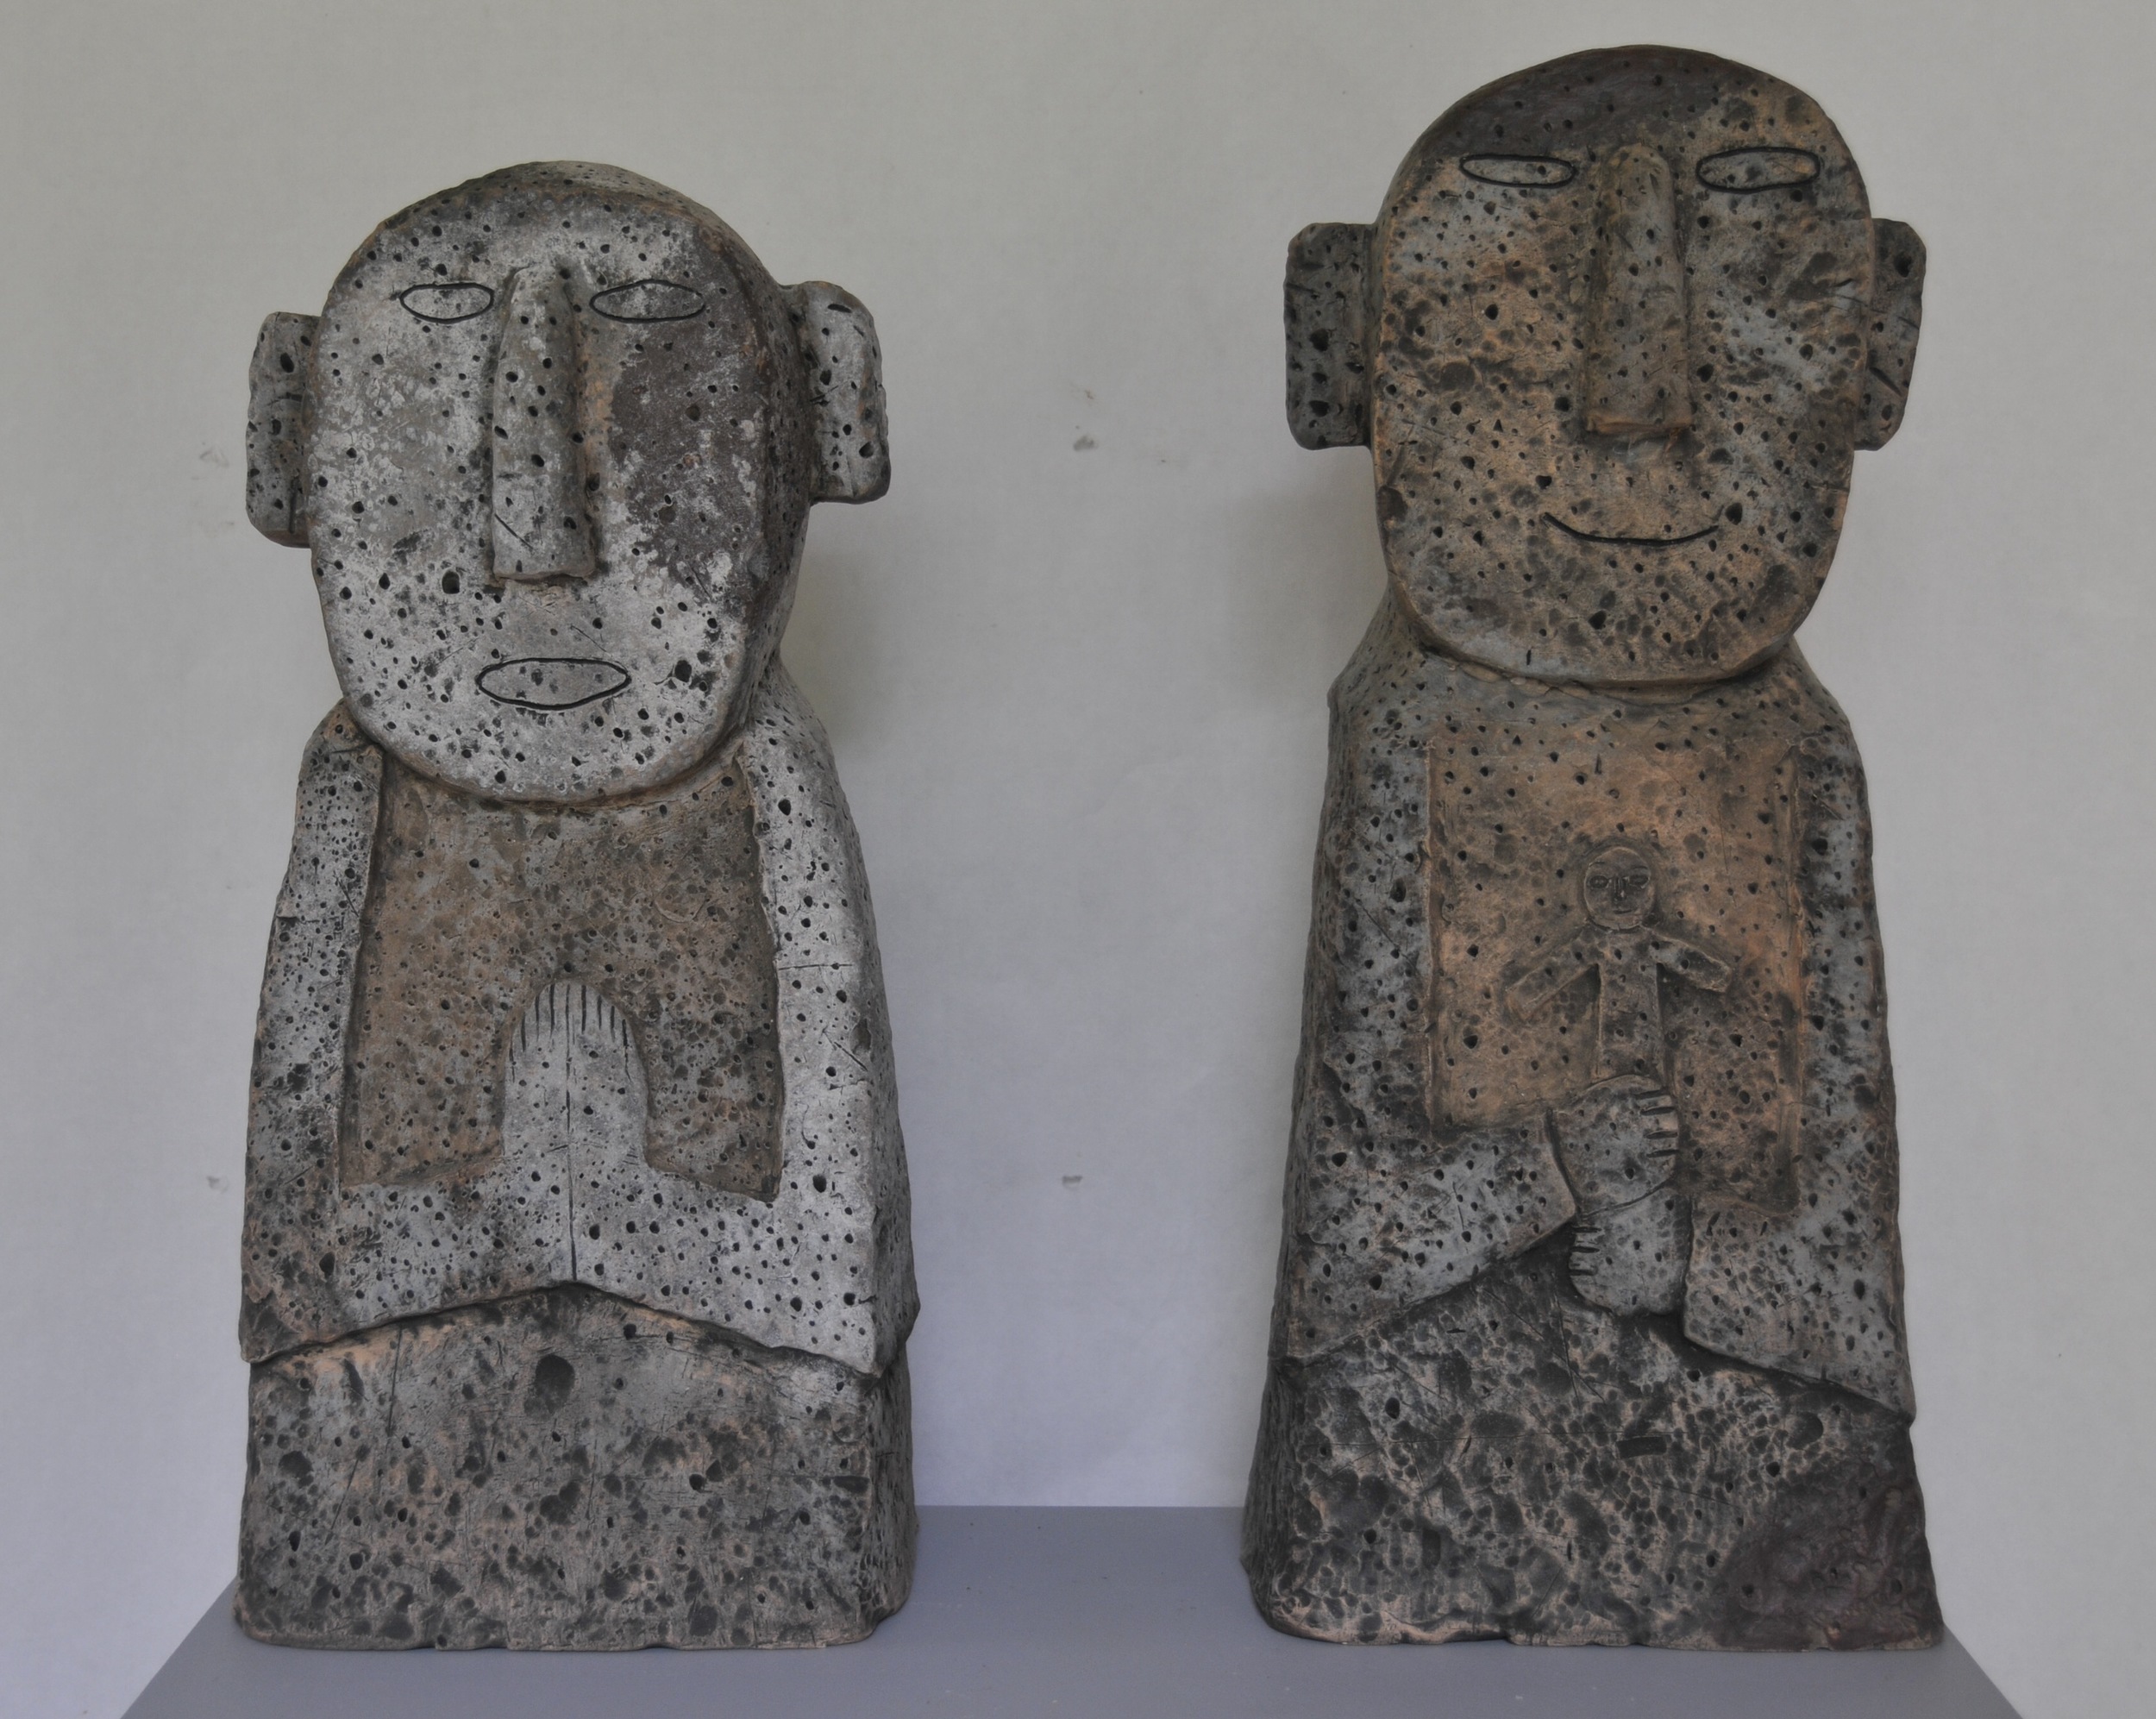  Jaeok Lee  Guardians of family , Clay, 9"x7"x22" and 9"x7x20" 